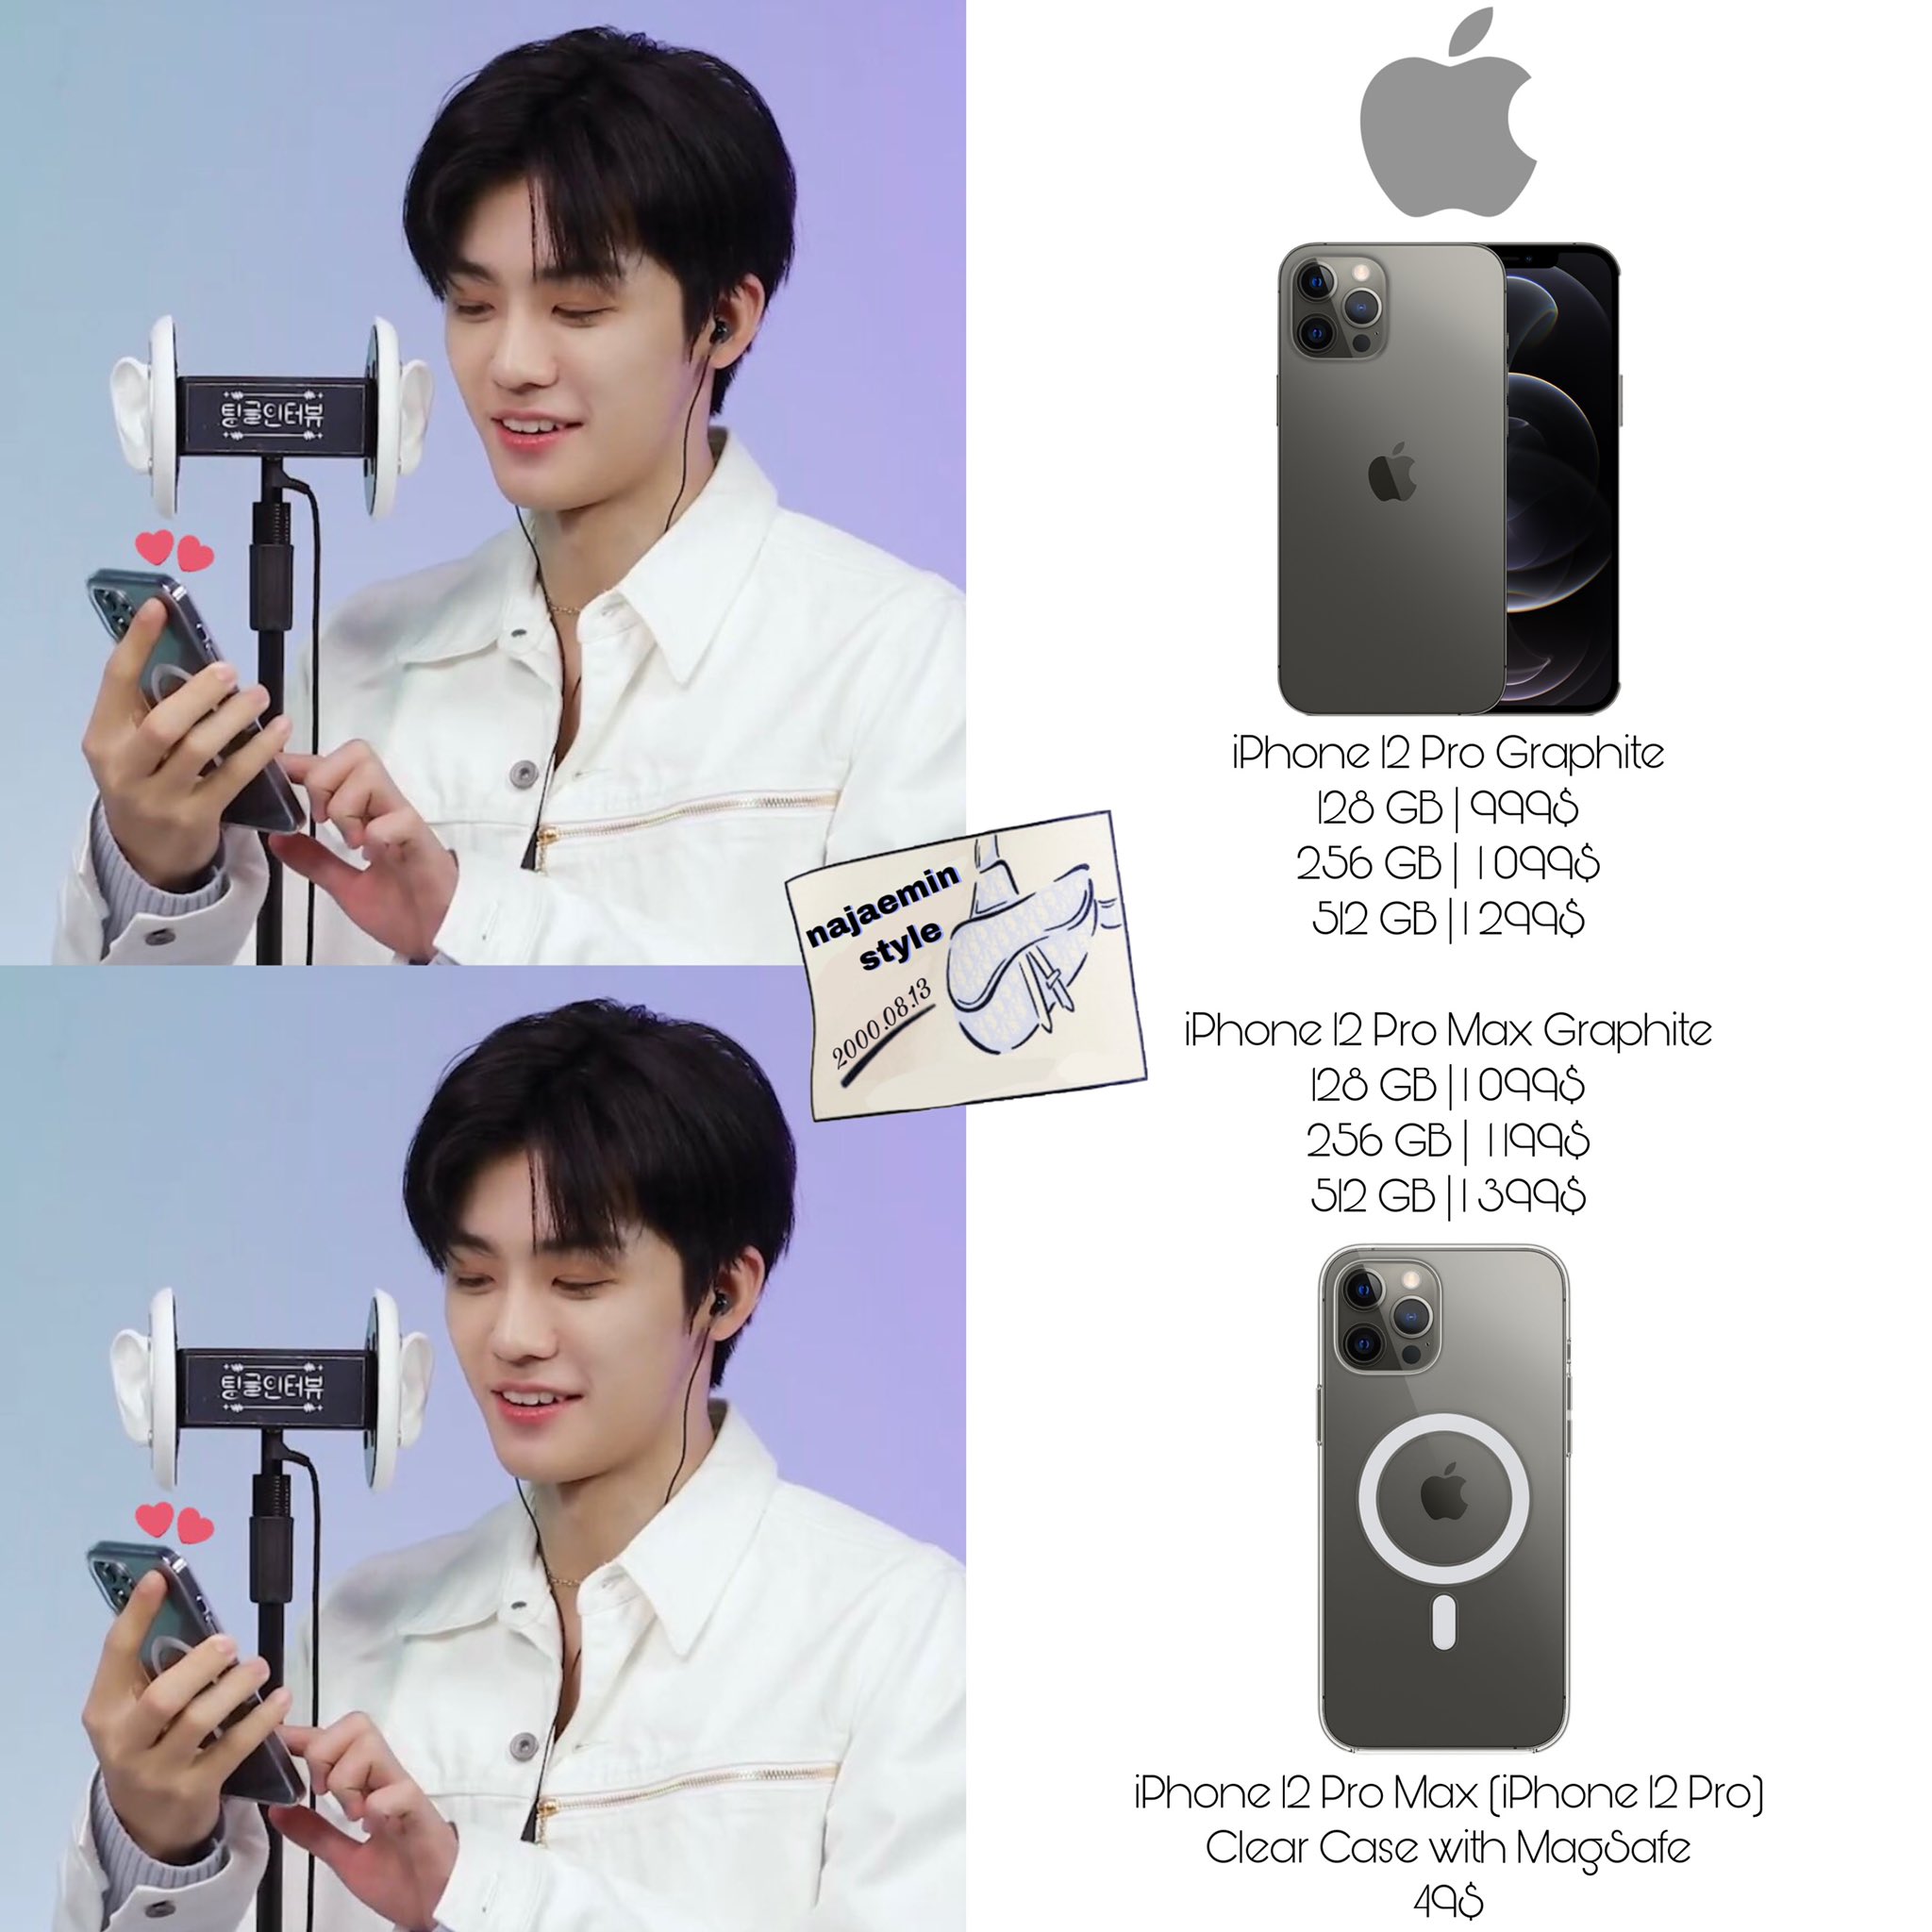 Nct Jaemin Fashion 재민 패션 옷장 Jaemin New Phone Apple Iphone 12 Pro Iphone 12 Pro Max Graphite Clear Case With Magsafe Jaeminstyle Jaemin Nct Nctdream Nctu